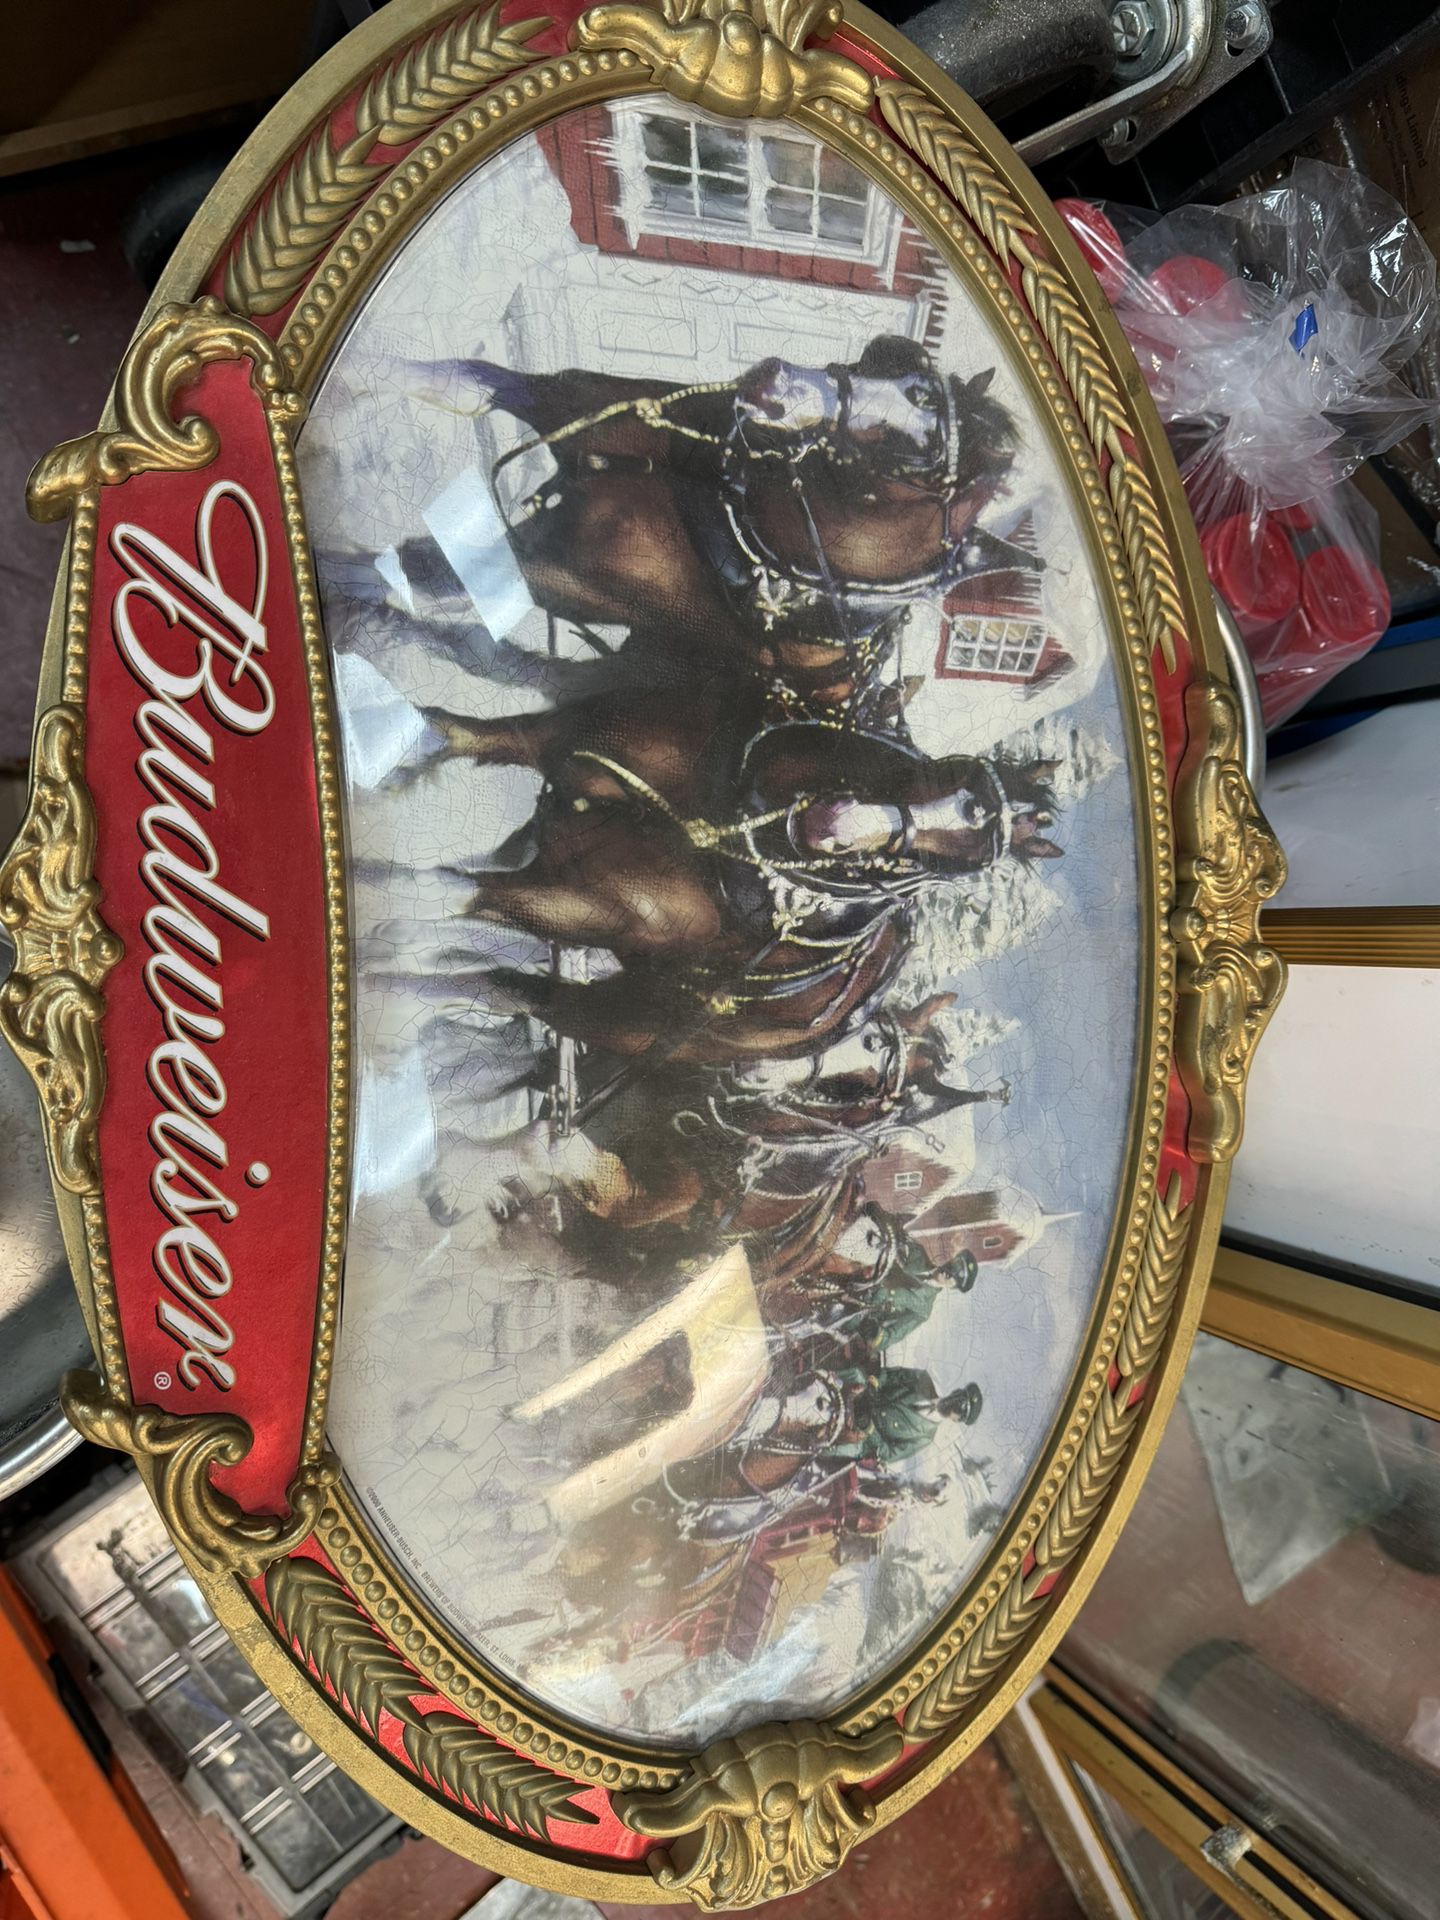 Free Budweiser Clydesdale Sign